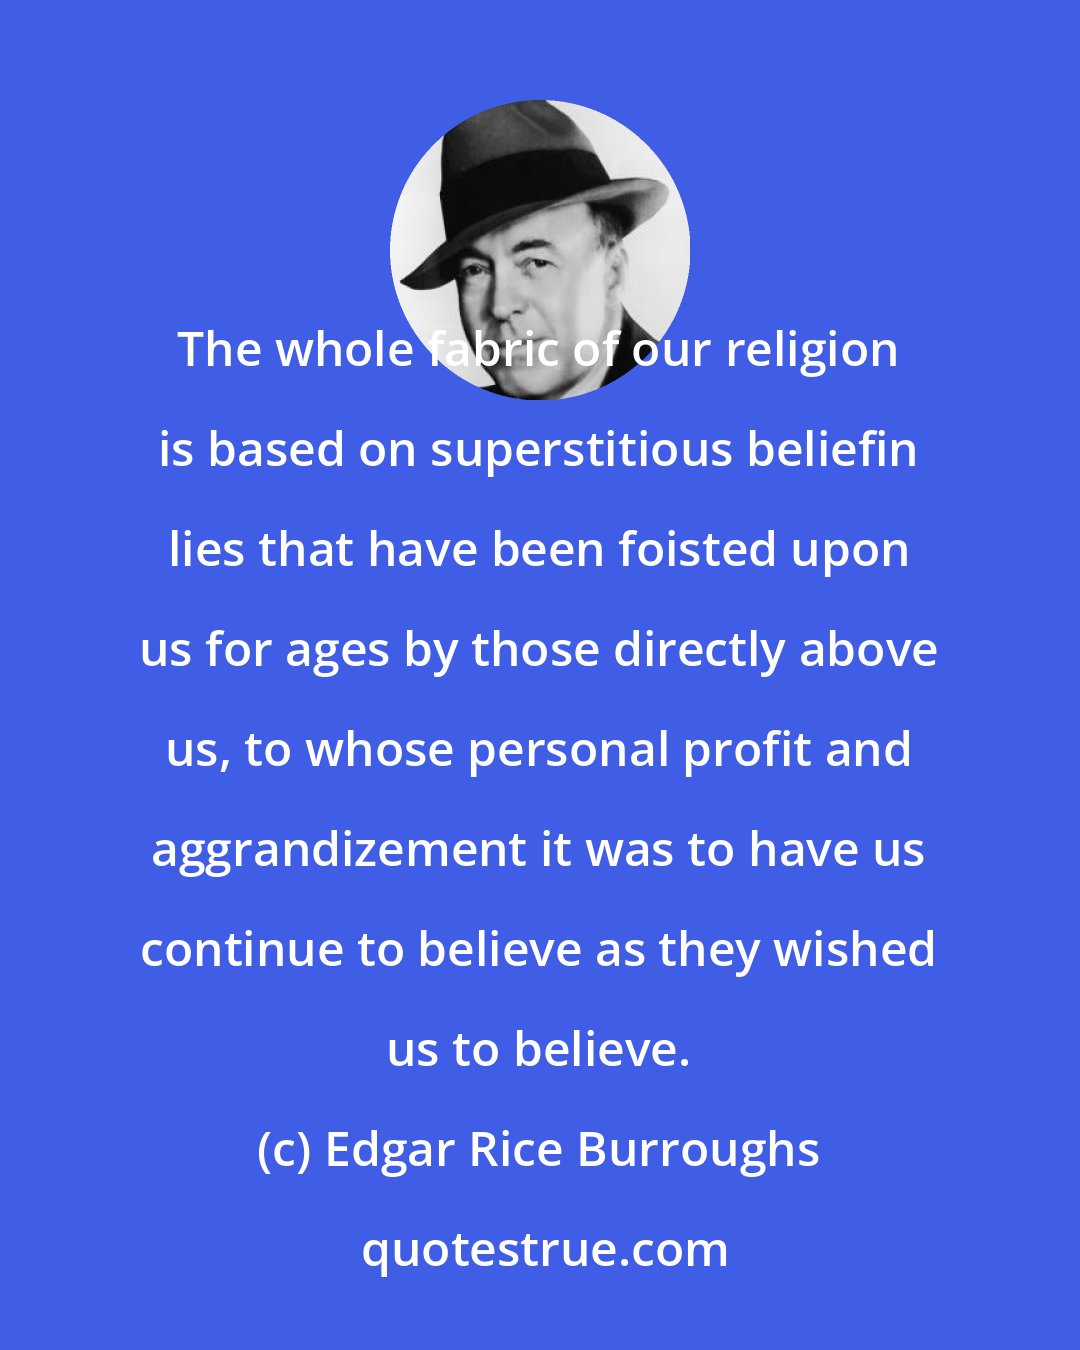 Edgar Rice Burroughs: The whole fabric of our religion is based on superstitious beliefin lies that have been foisted upon us for ages by those directly above us, to whose personal profit and aggrandizement it was to have us continue to believe as they wished us to believe.